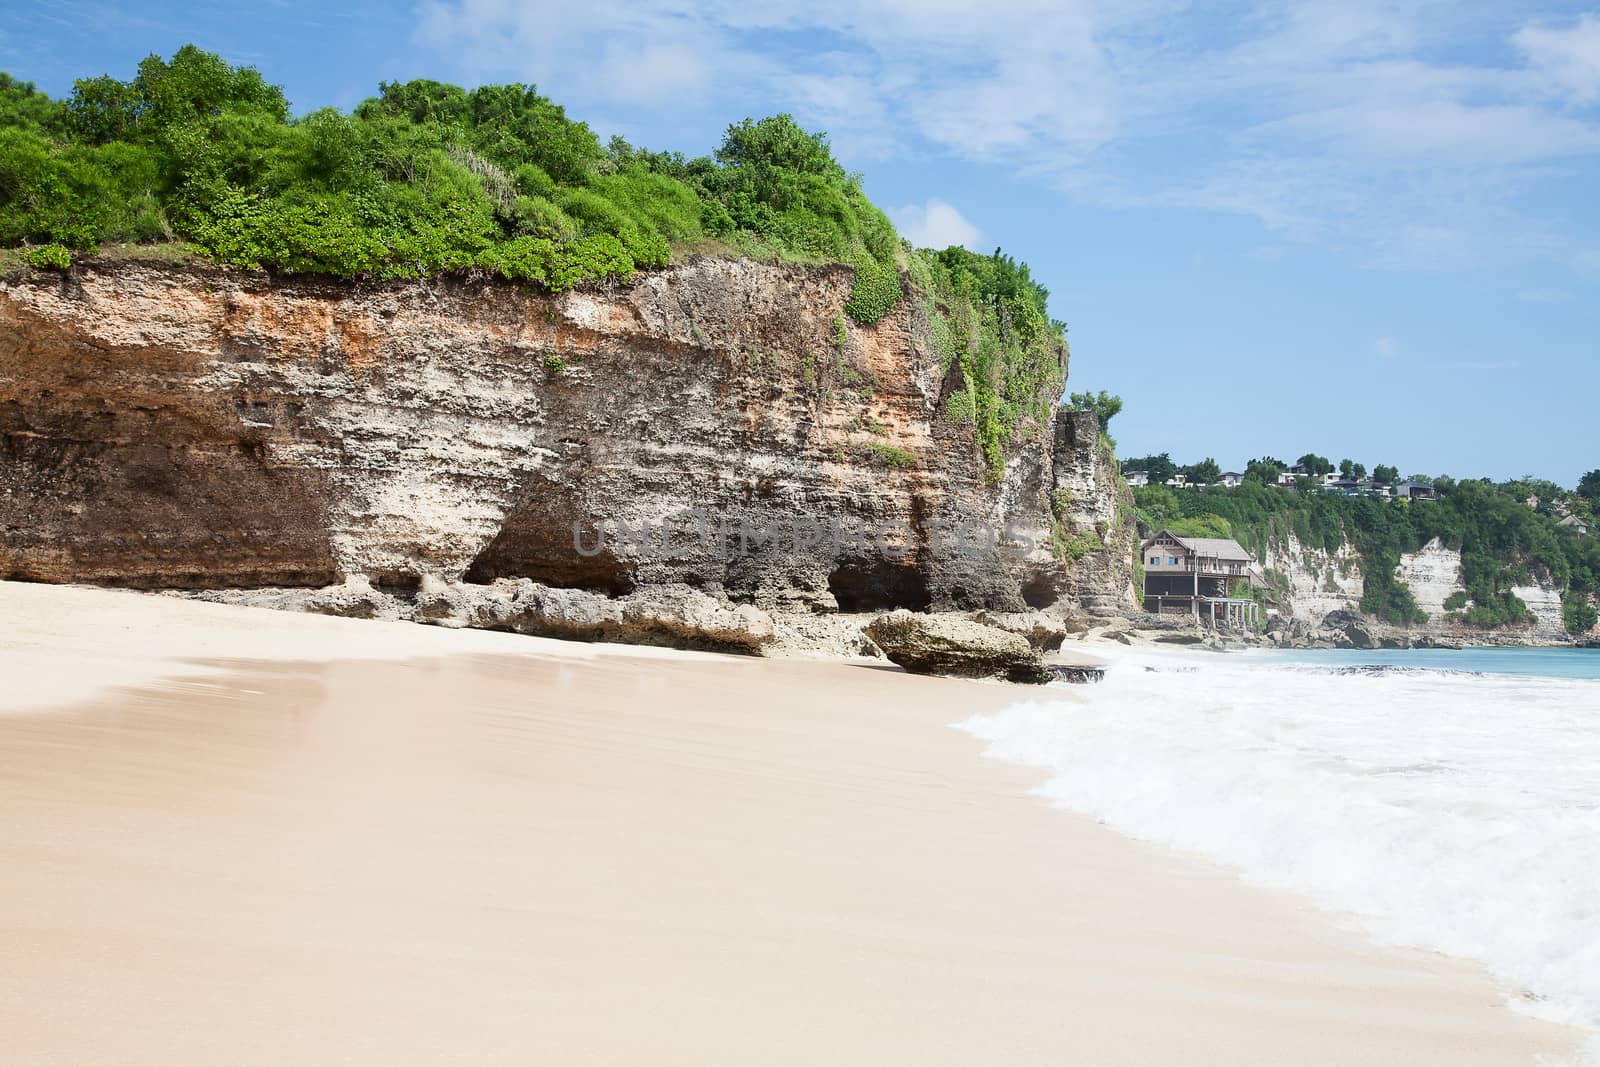  beautiful balinese Dreamland beach (One of the most popular surfing areas on Bali, Indonesia)